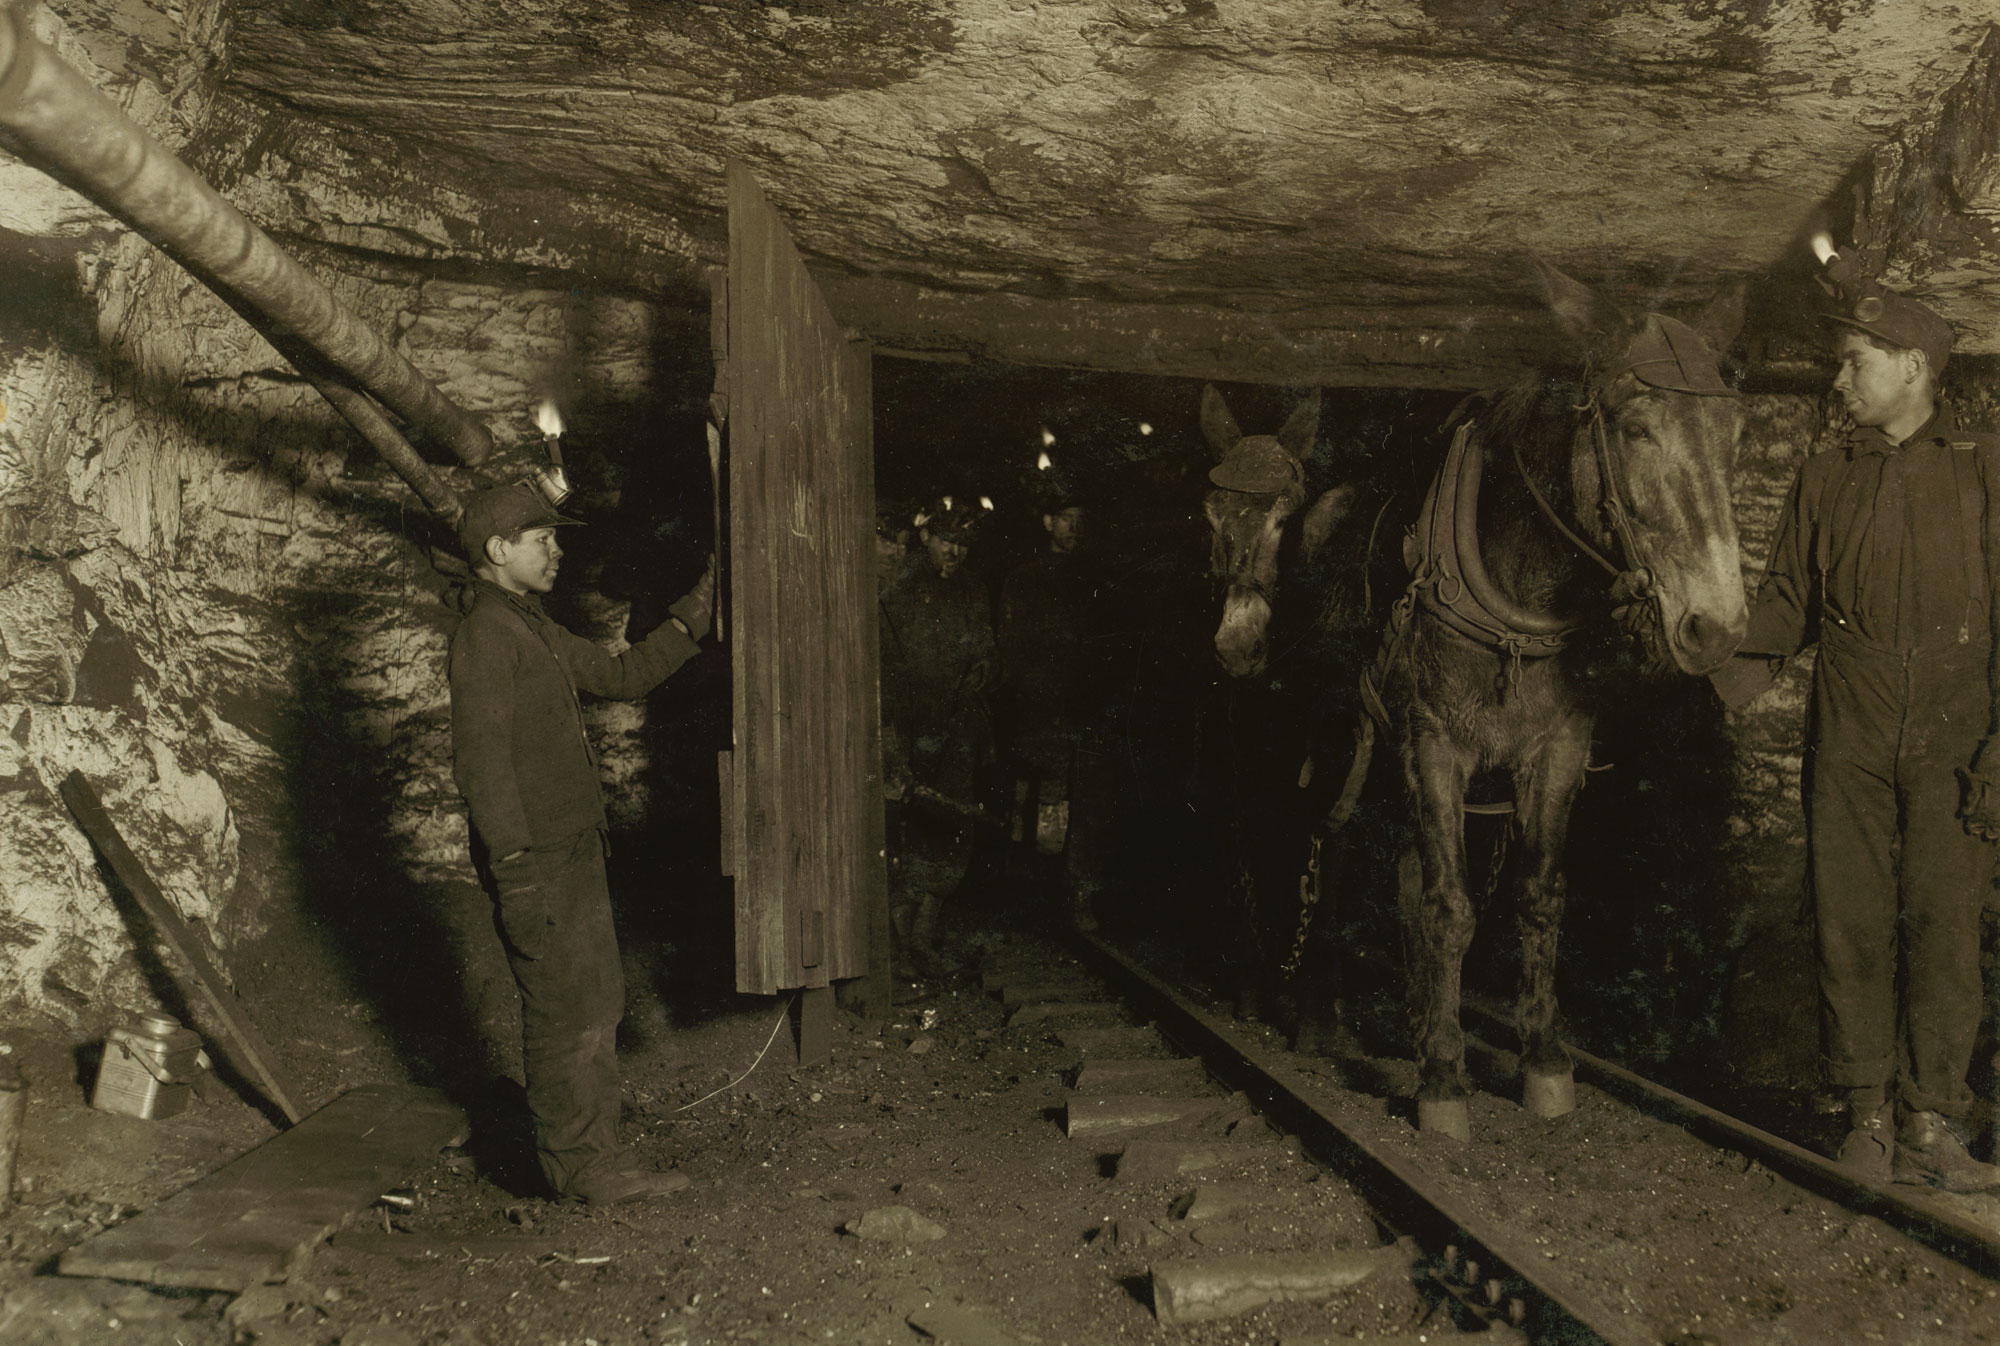 Sepia-toned photograph of boys working in a mine, 1911. The photo shows a boy of 13 years old holding open a wooden door so a mine worker (maybe a teenager) can lead mules through the door on a railway track. The boy holding the door is dressed in a dark colored coat and long pants. He is wearing a cap with a lamp on the front. The other miner is dressed similarly. At least two more miners can be seen in the gloom beyond the door. The walls and ceiling around the door are painted white.